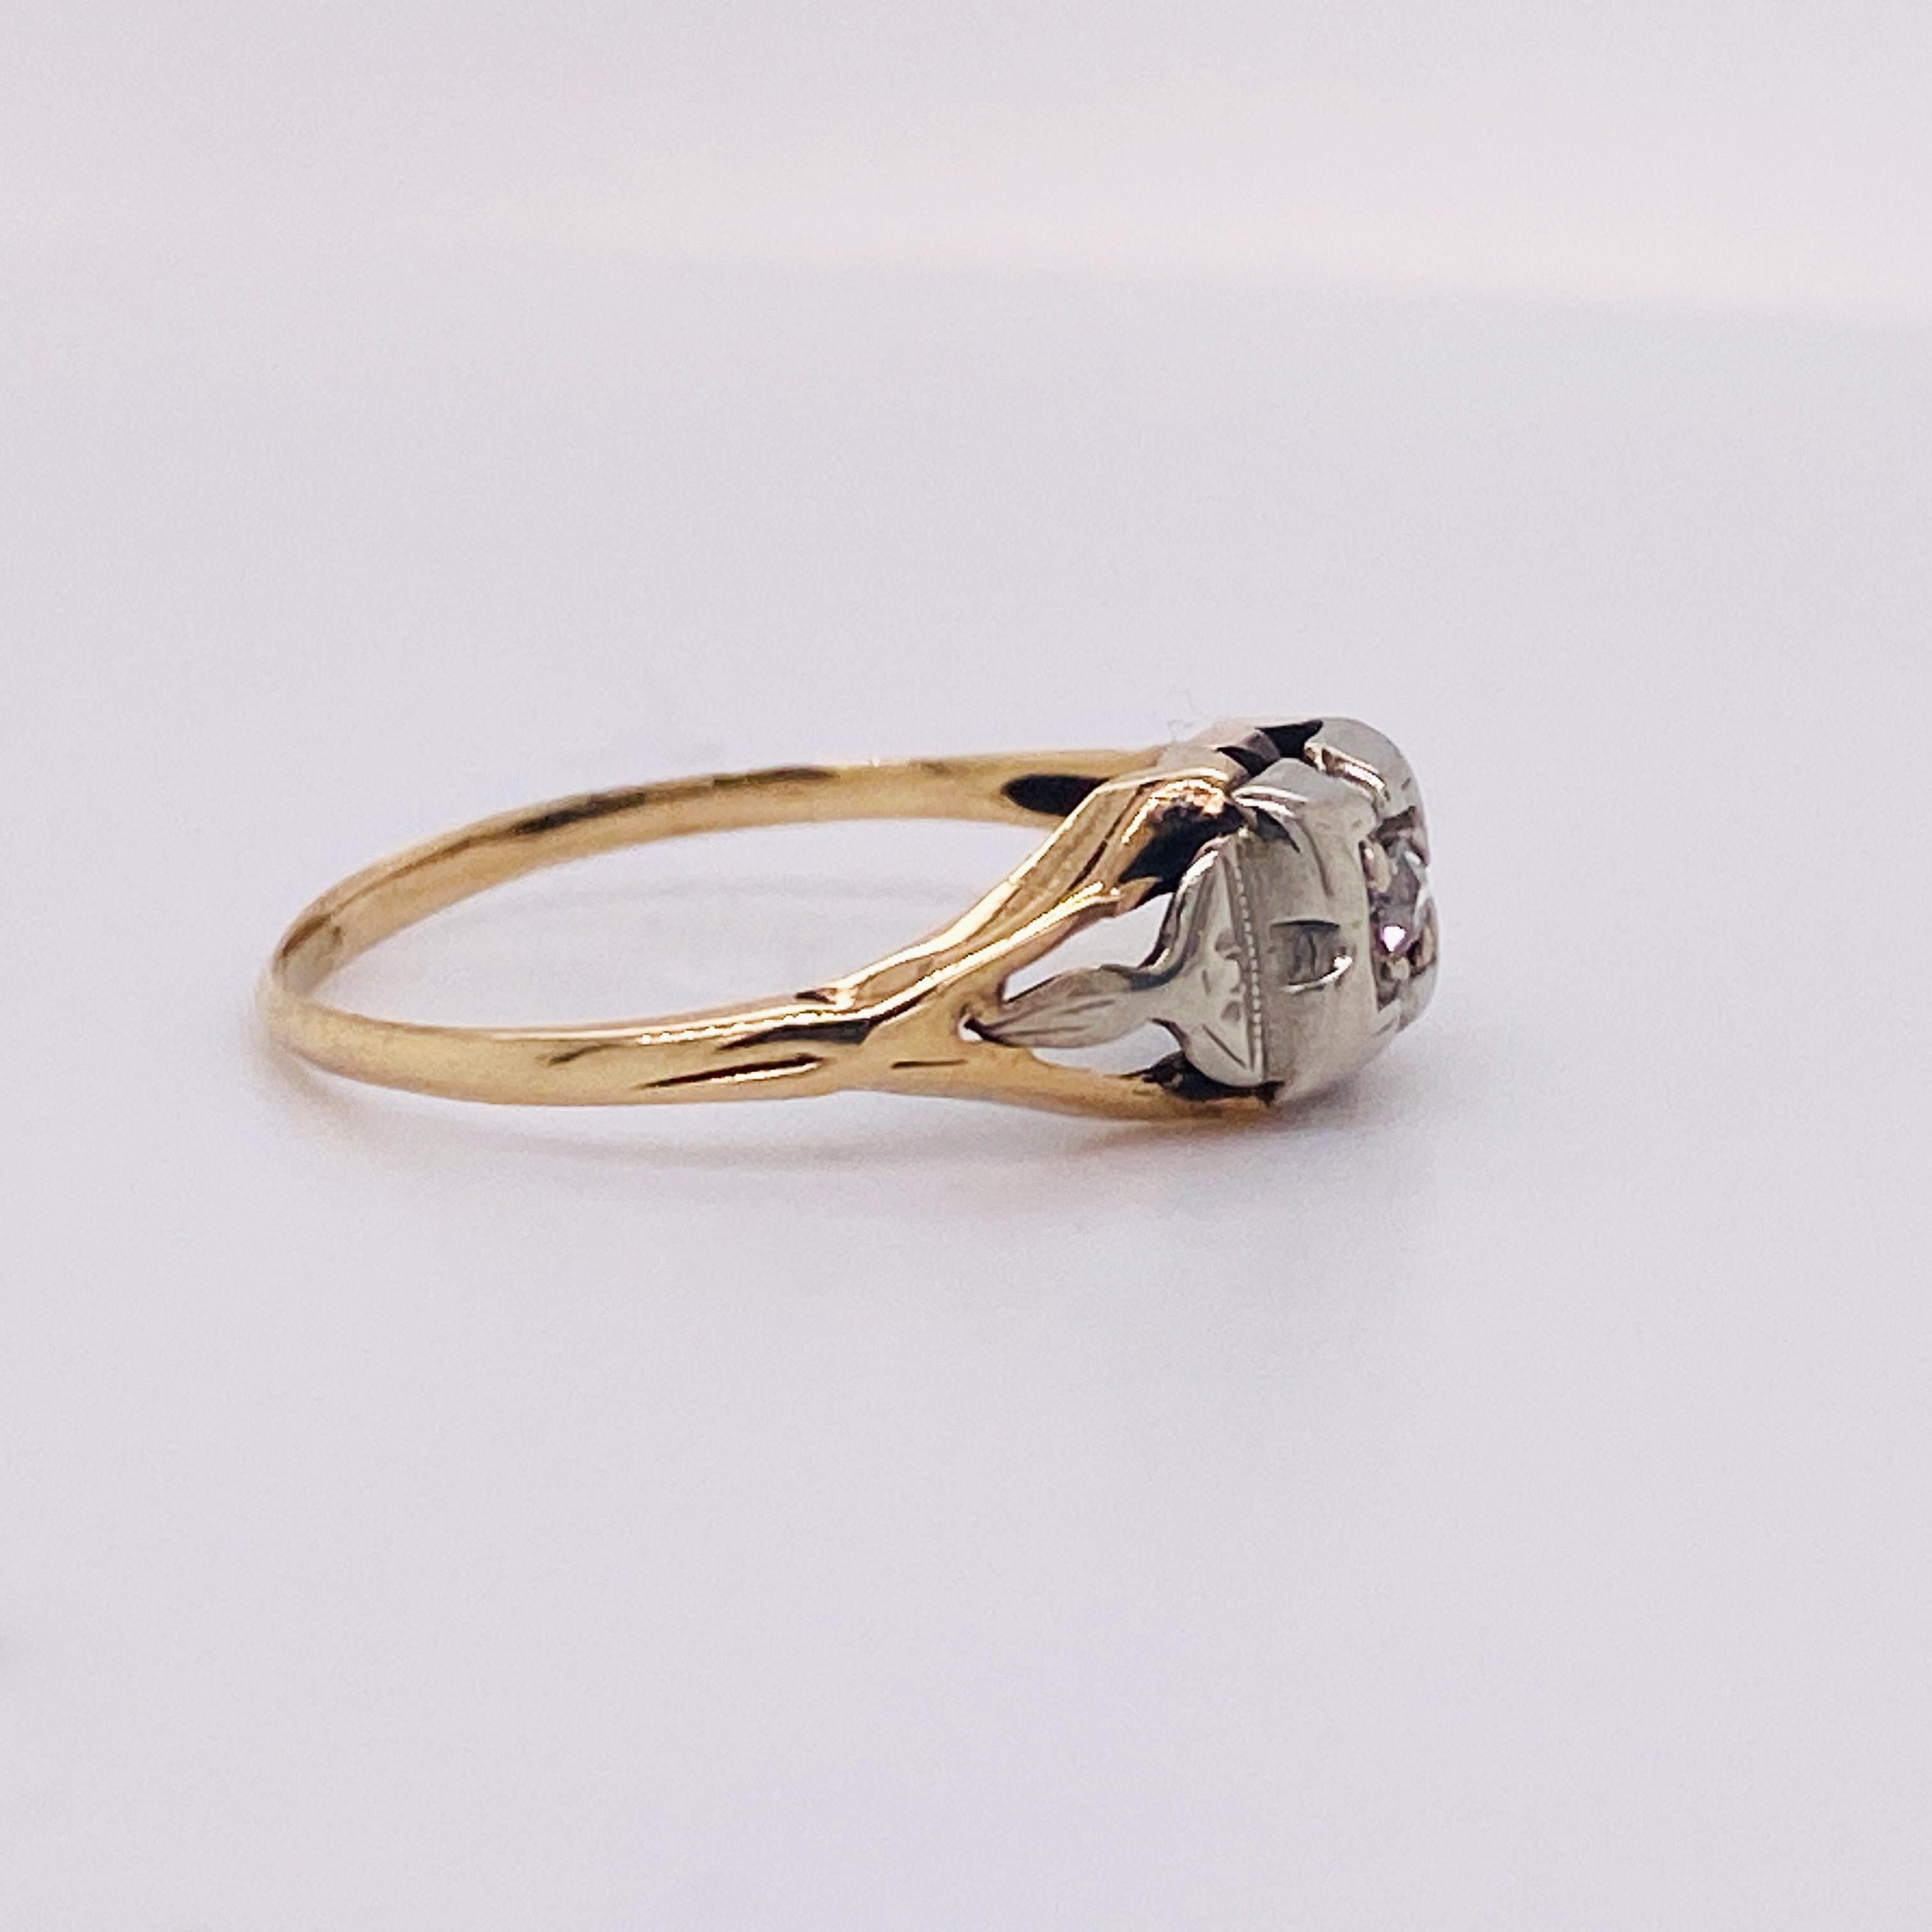 This vintage beauty is is the perfect ring for lovers of 1930s charm. A sweet old mine cut diamond is held at the raised center of the four prong top accented with floral details. The white gold centerpiece tapers and merges with yellow gold split